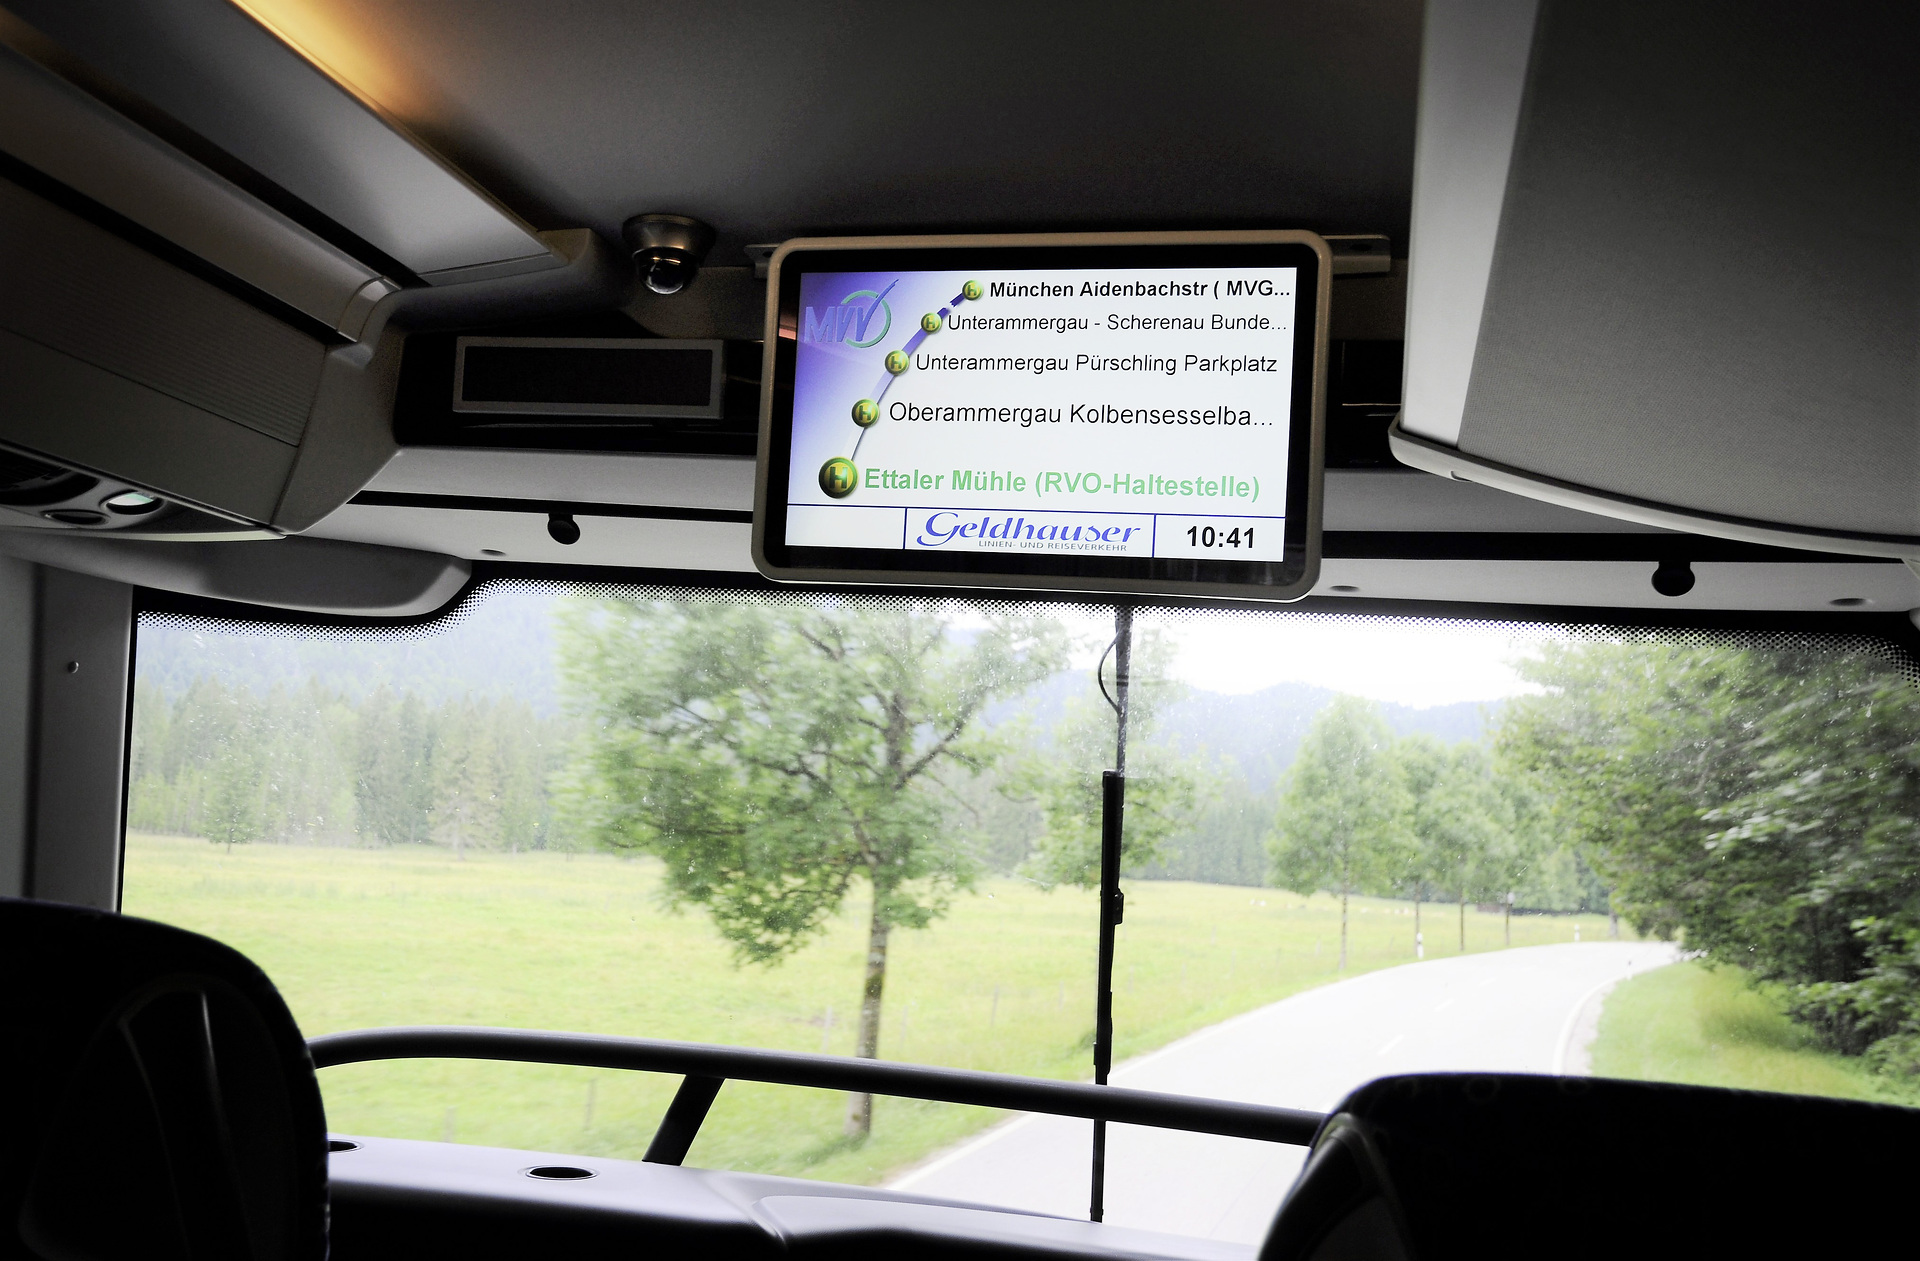 Stress-free travel to the mountains with the Setra